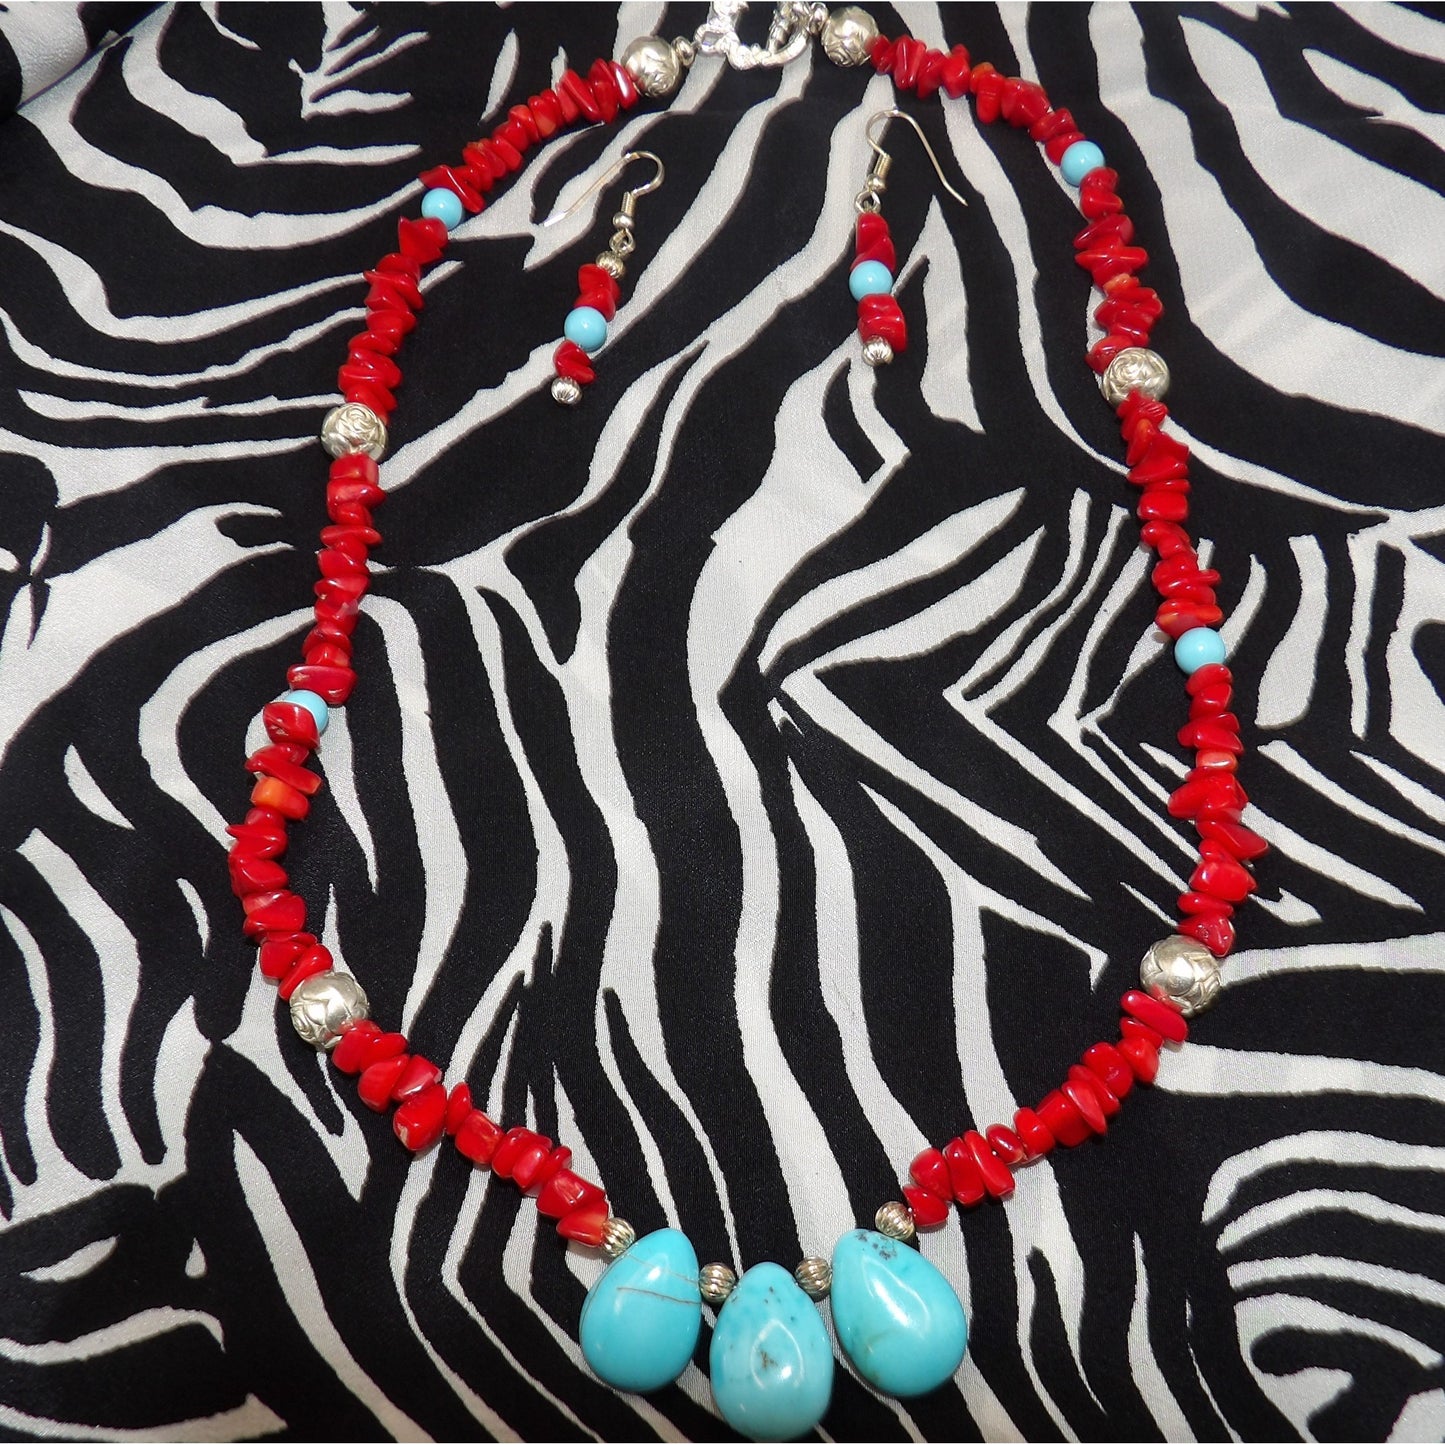 Teardrop Turquoise Stones, Red Coral Chips and silver beads